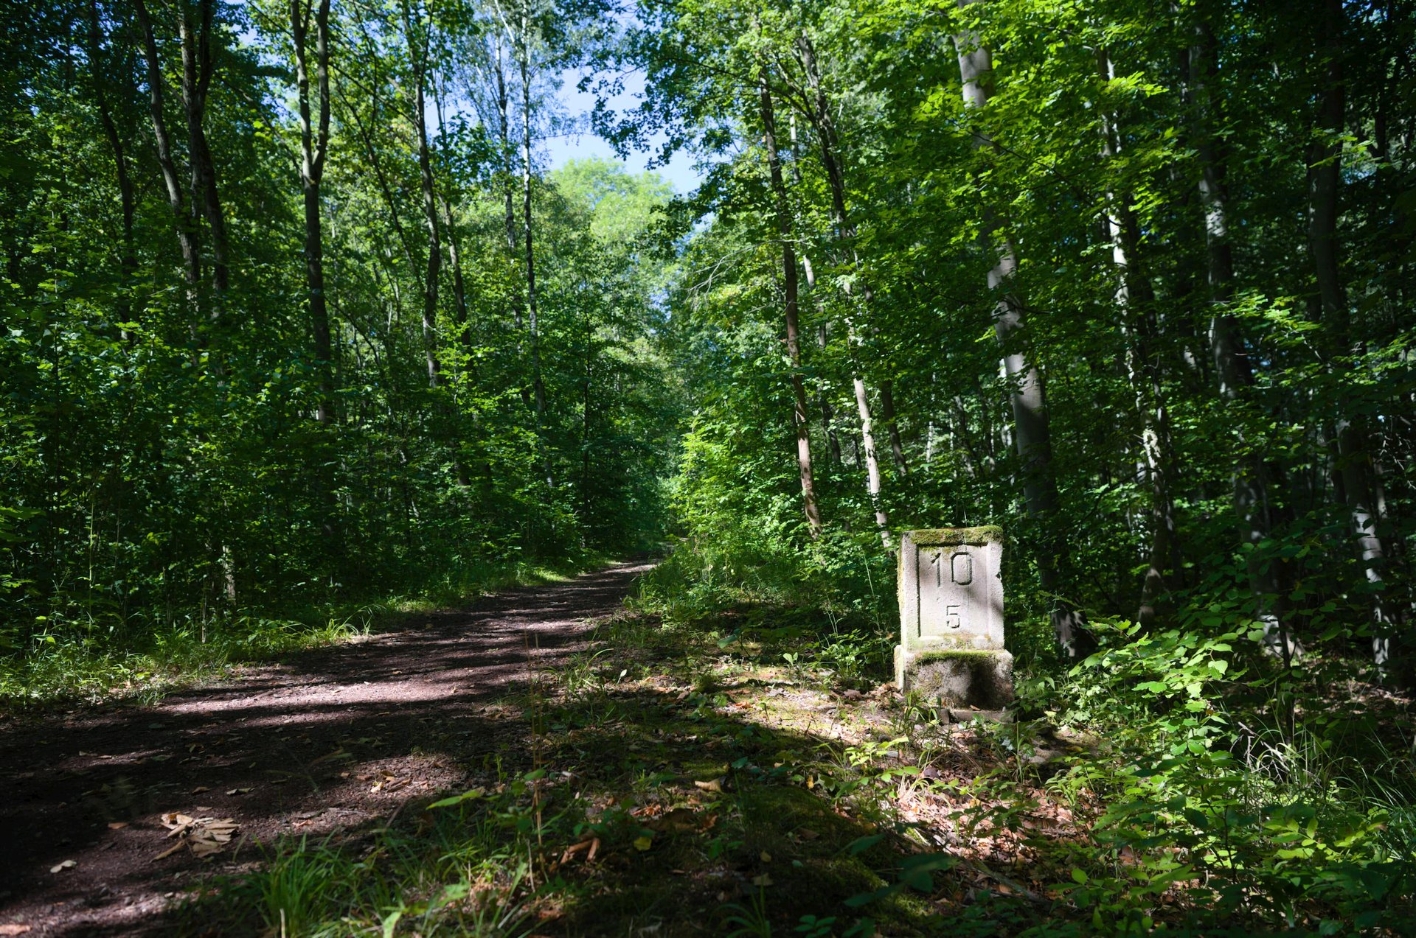 The Buchenwaldbahn memorial trail leads through the forest. At the side of the path a milestone of the former Buchenwaldbahn.